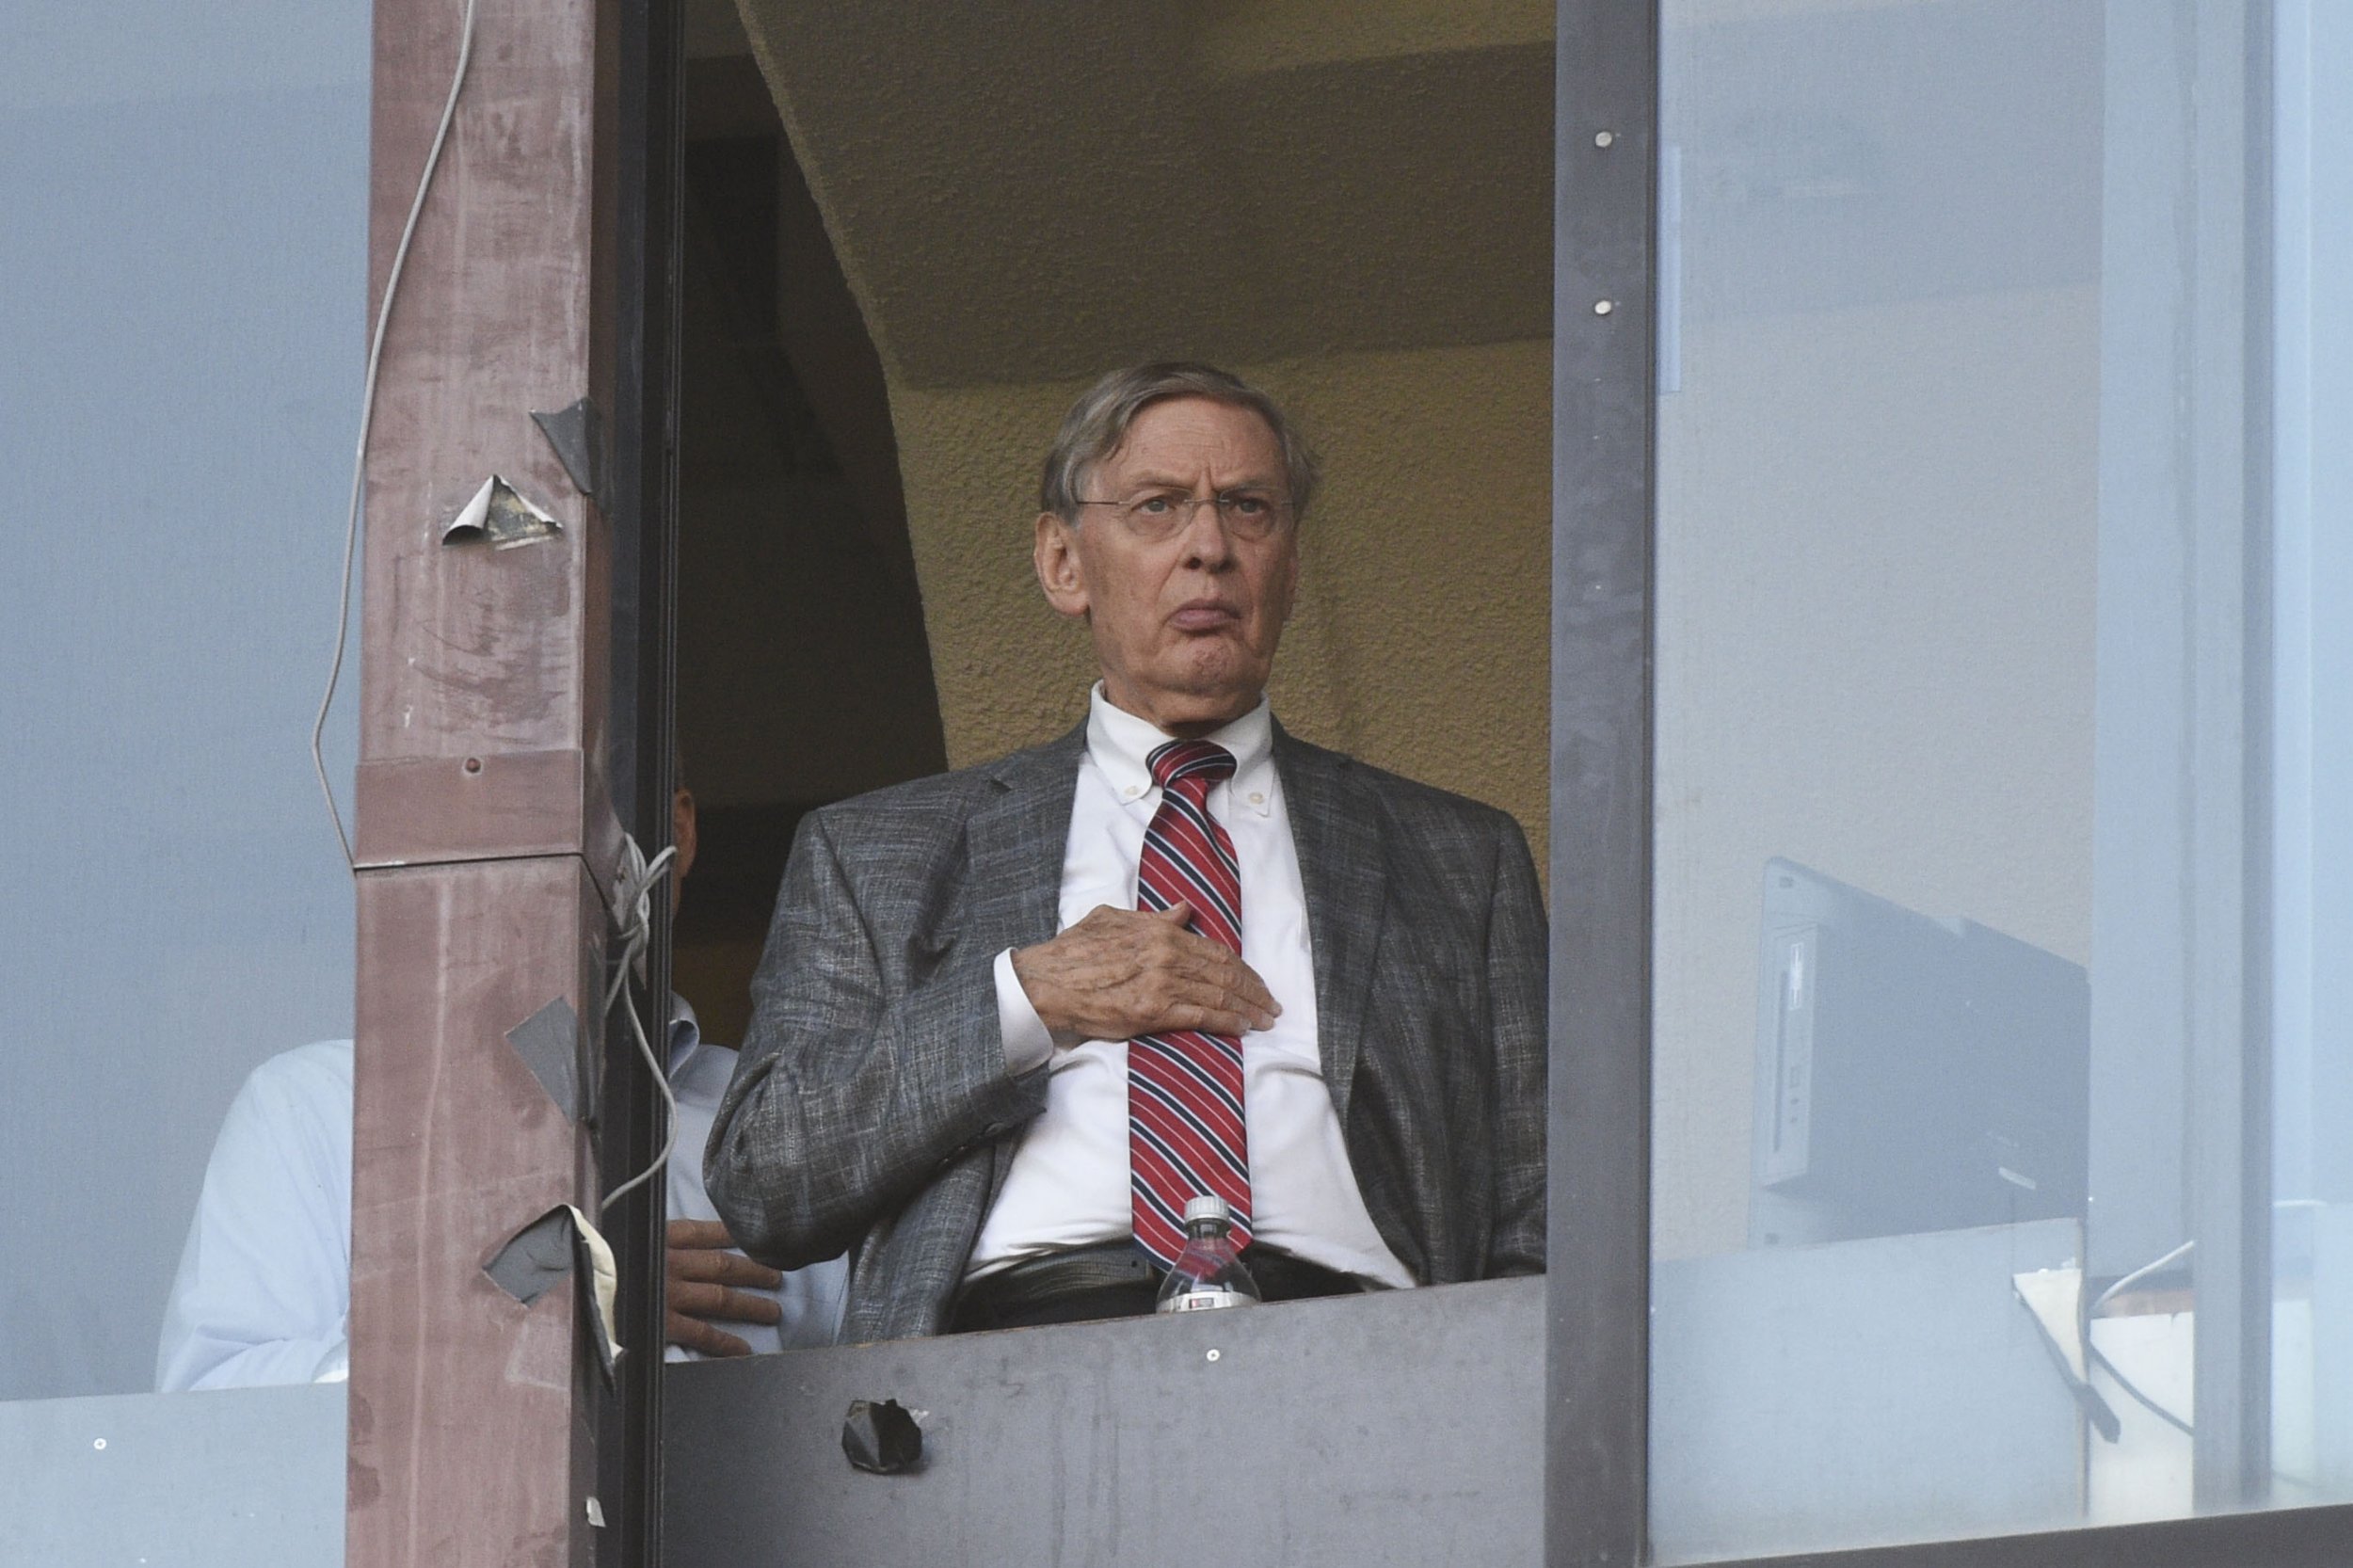 Bud Selig Ruined the MLB All-Star Game 20 Years Ago. It's Still